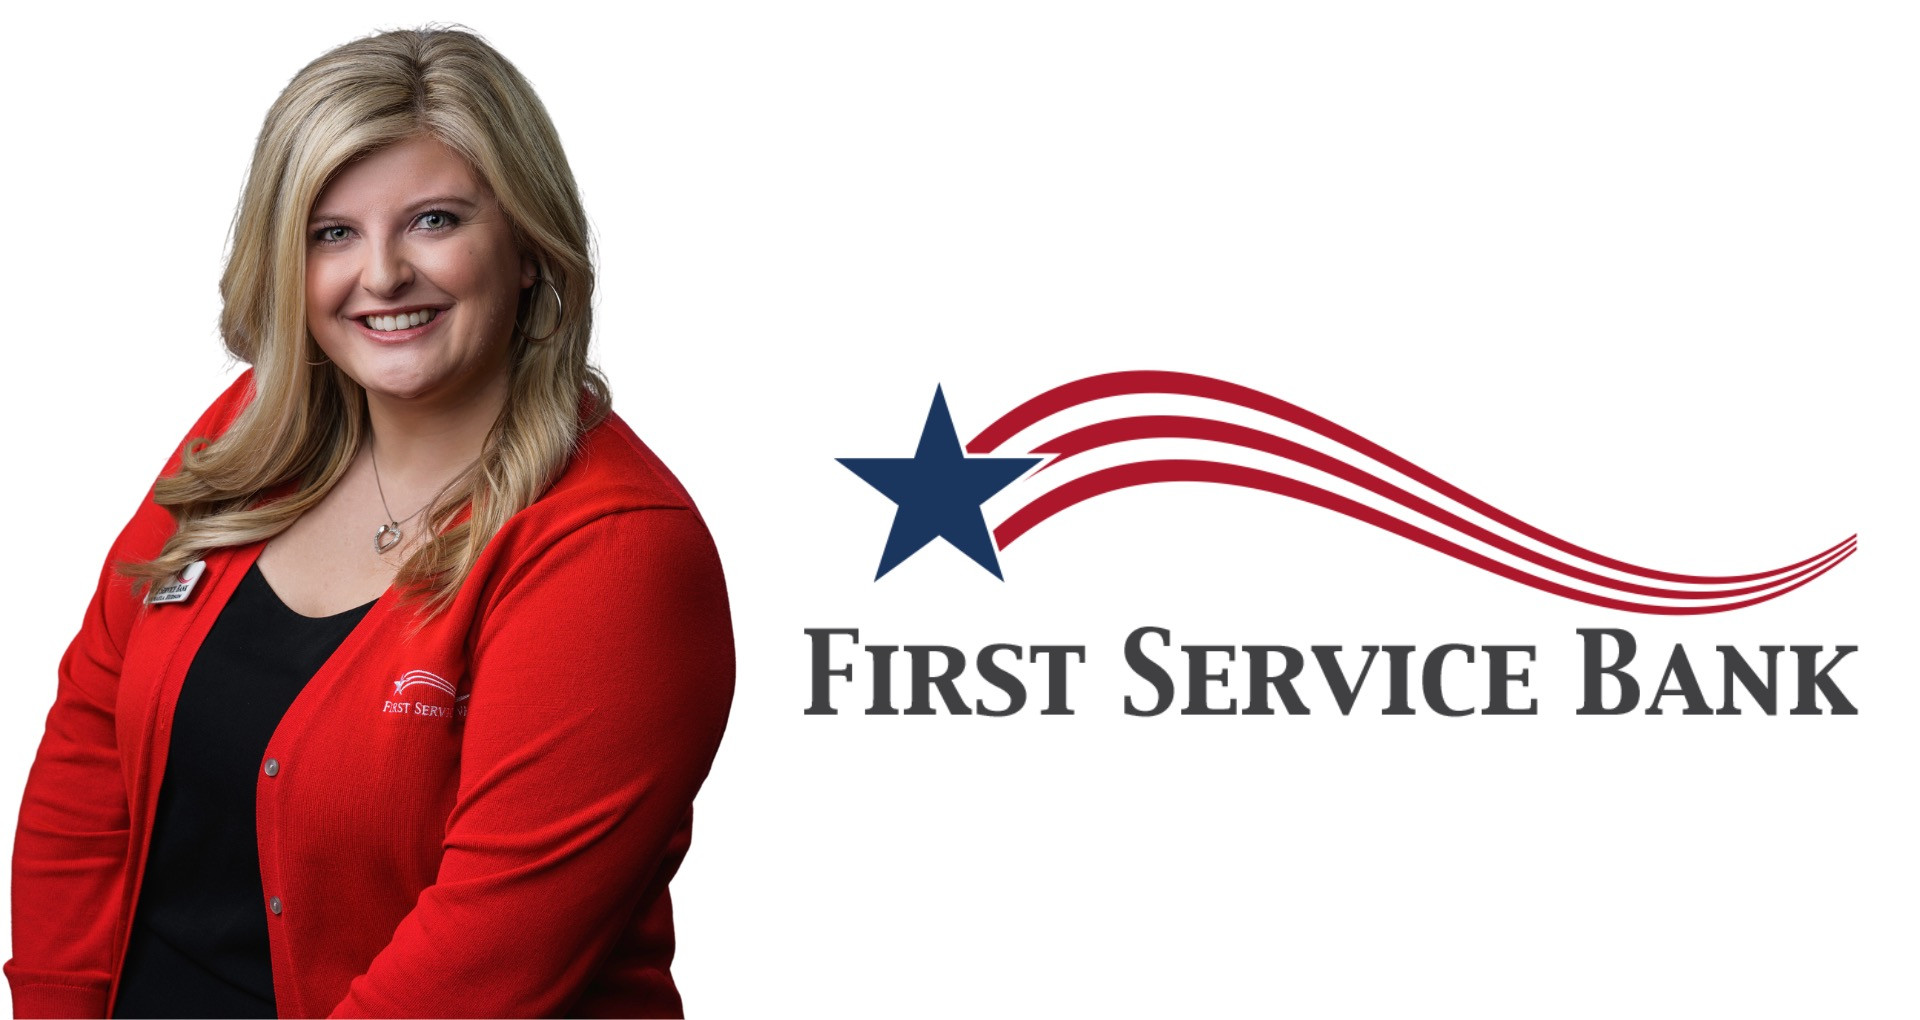 Michaela Hudson has joined First Service Bank